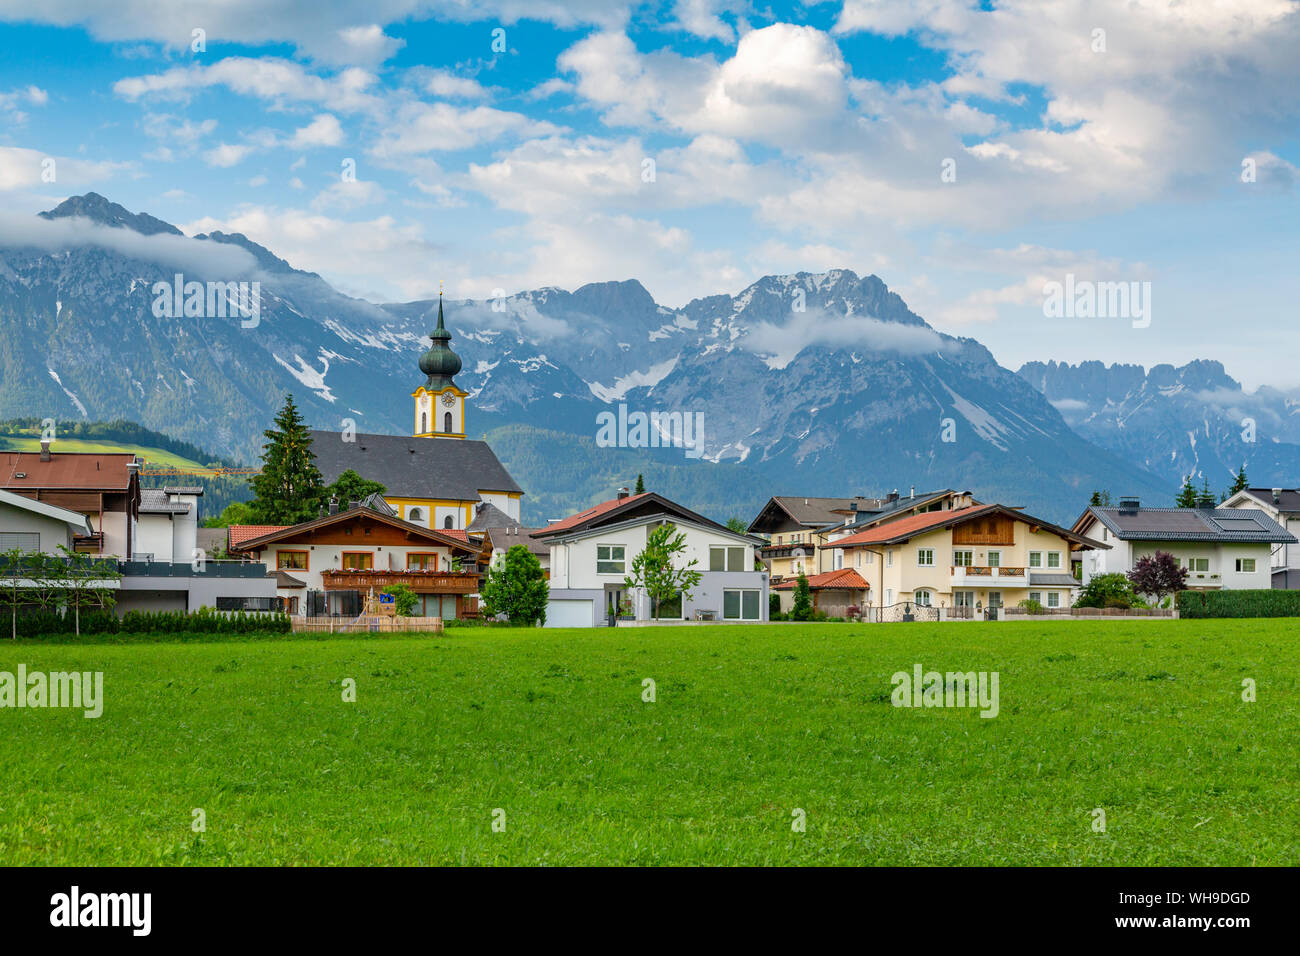 View of Pfarramt Soll Church and mountains in background, Soll, Solllandl, Tyrol, Austria, Europe Stock Photo